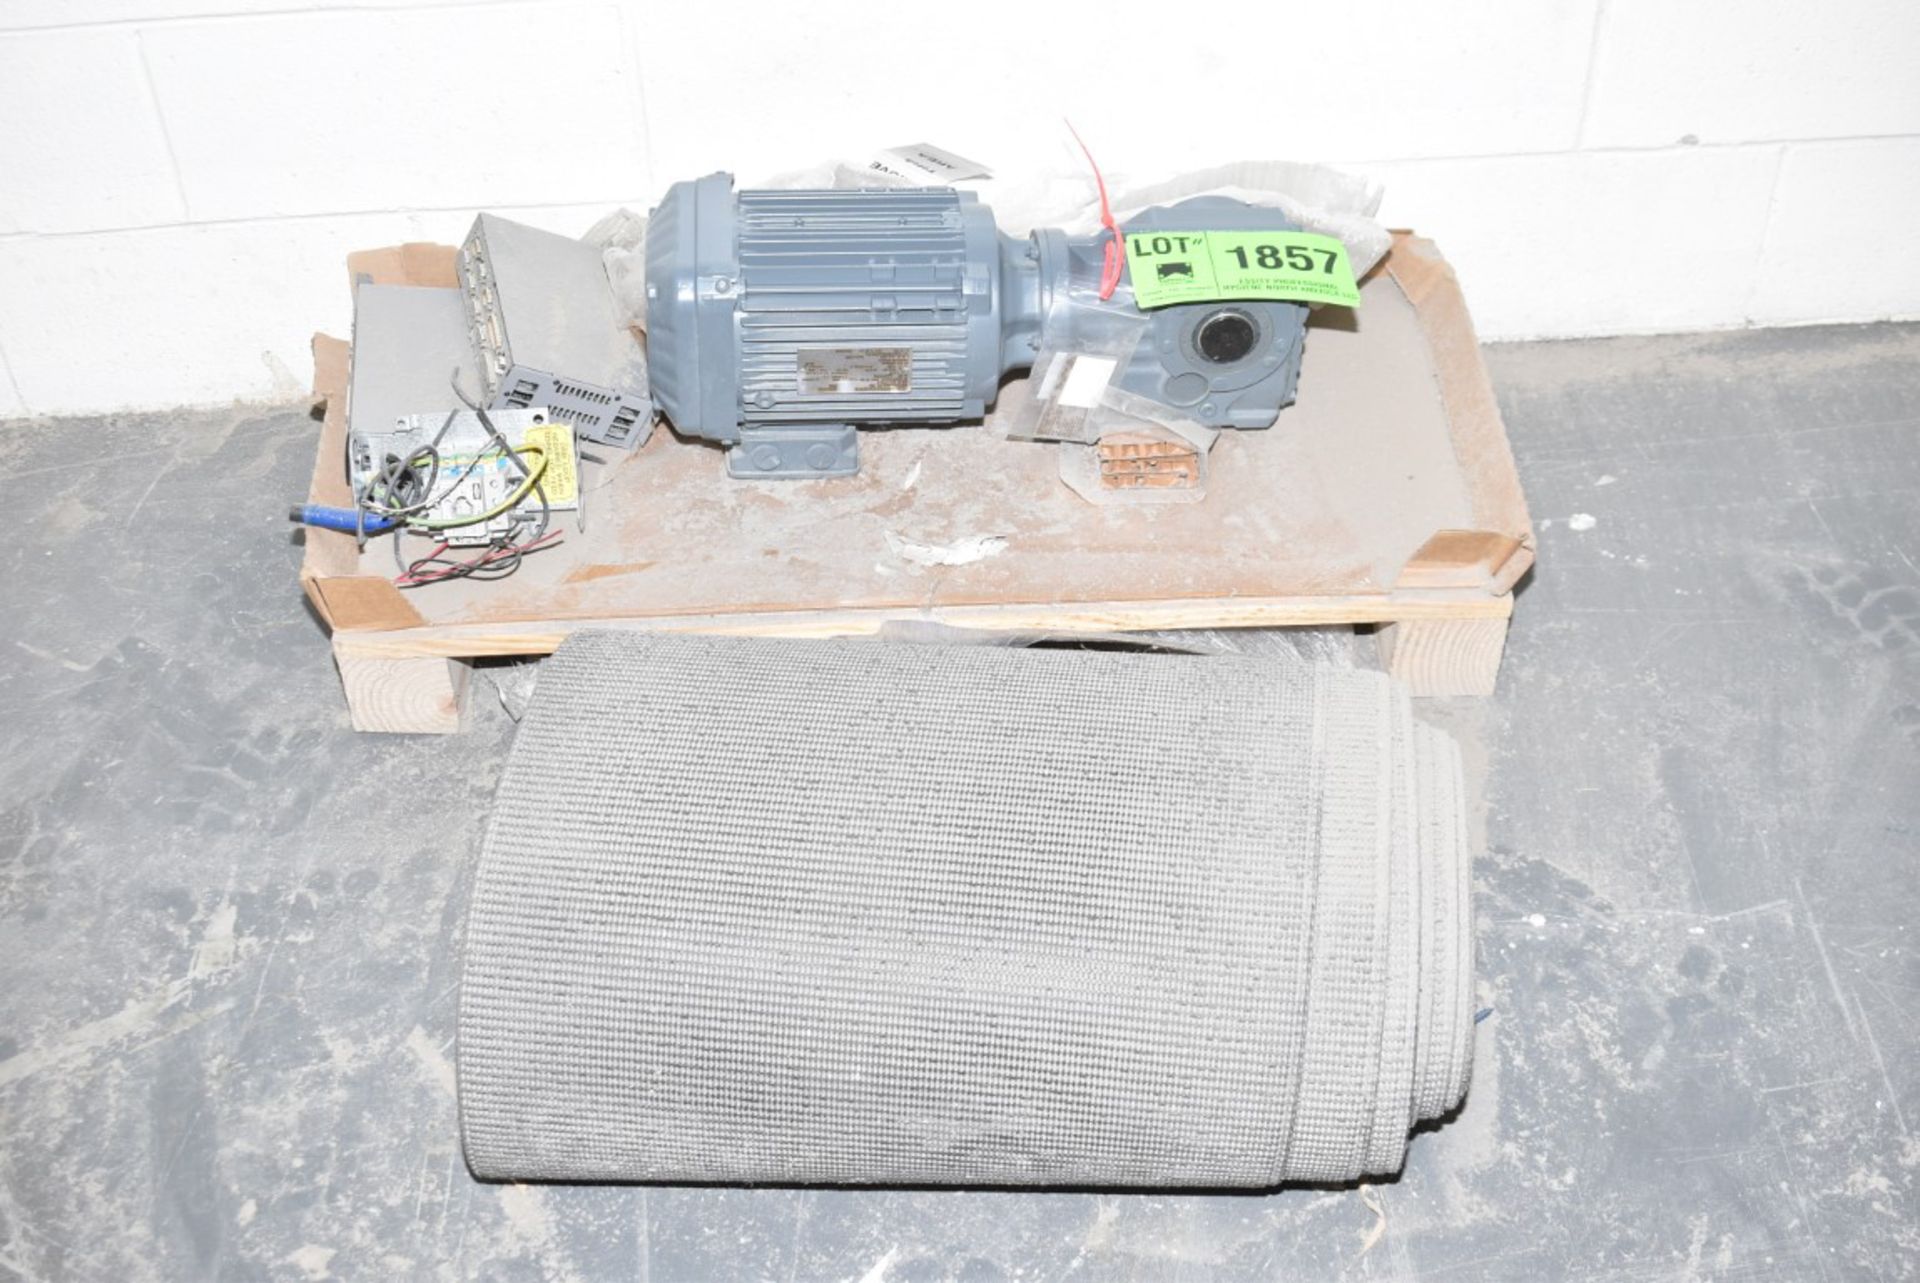 LOT/ SEW EURODRIVE 2 HP ELECTRIC MOTOR WITH GEARBOX, 1800 MAX. RPM, 230/460V, 3PH, 60HZ & RUBBER